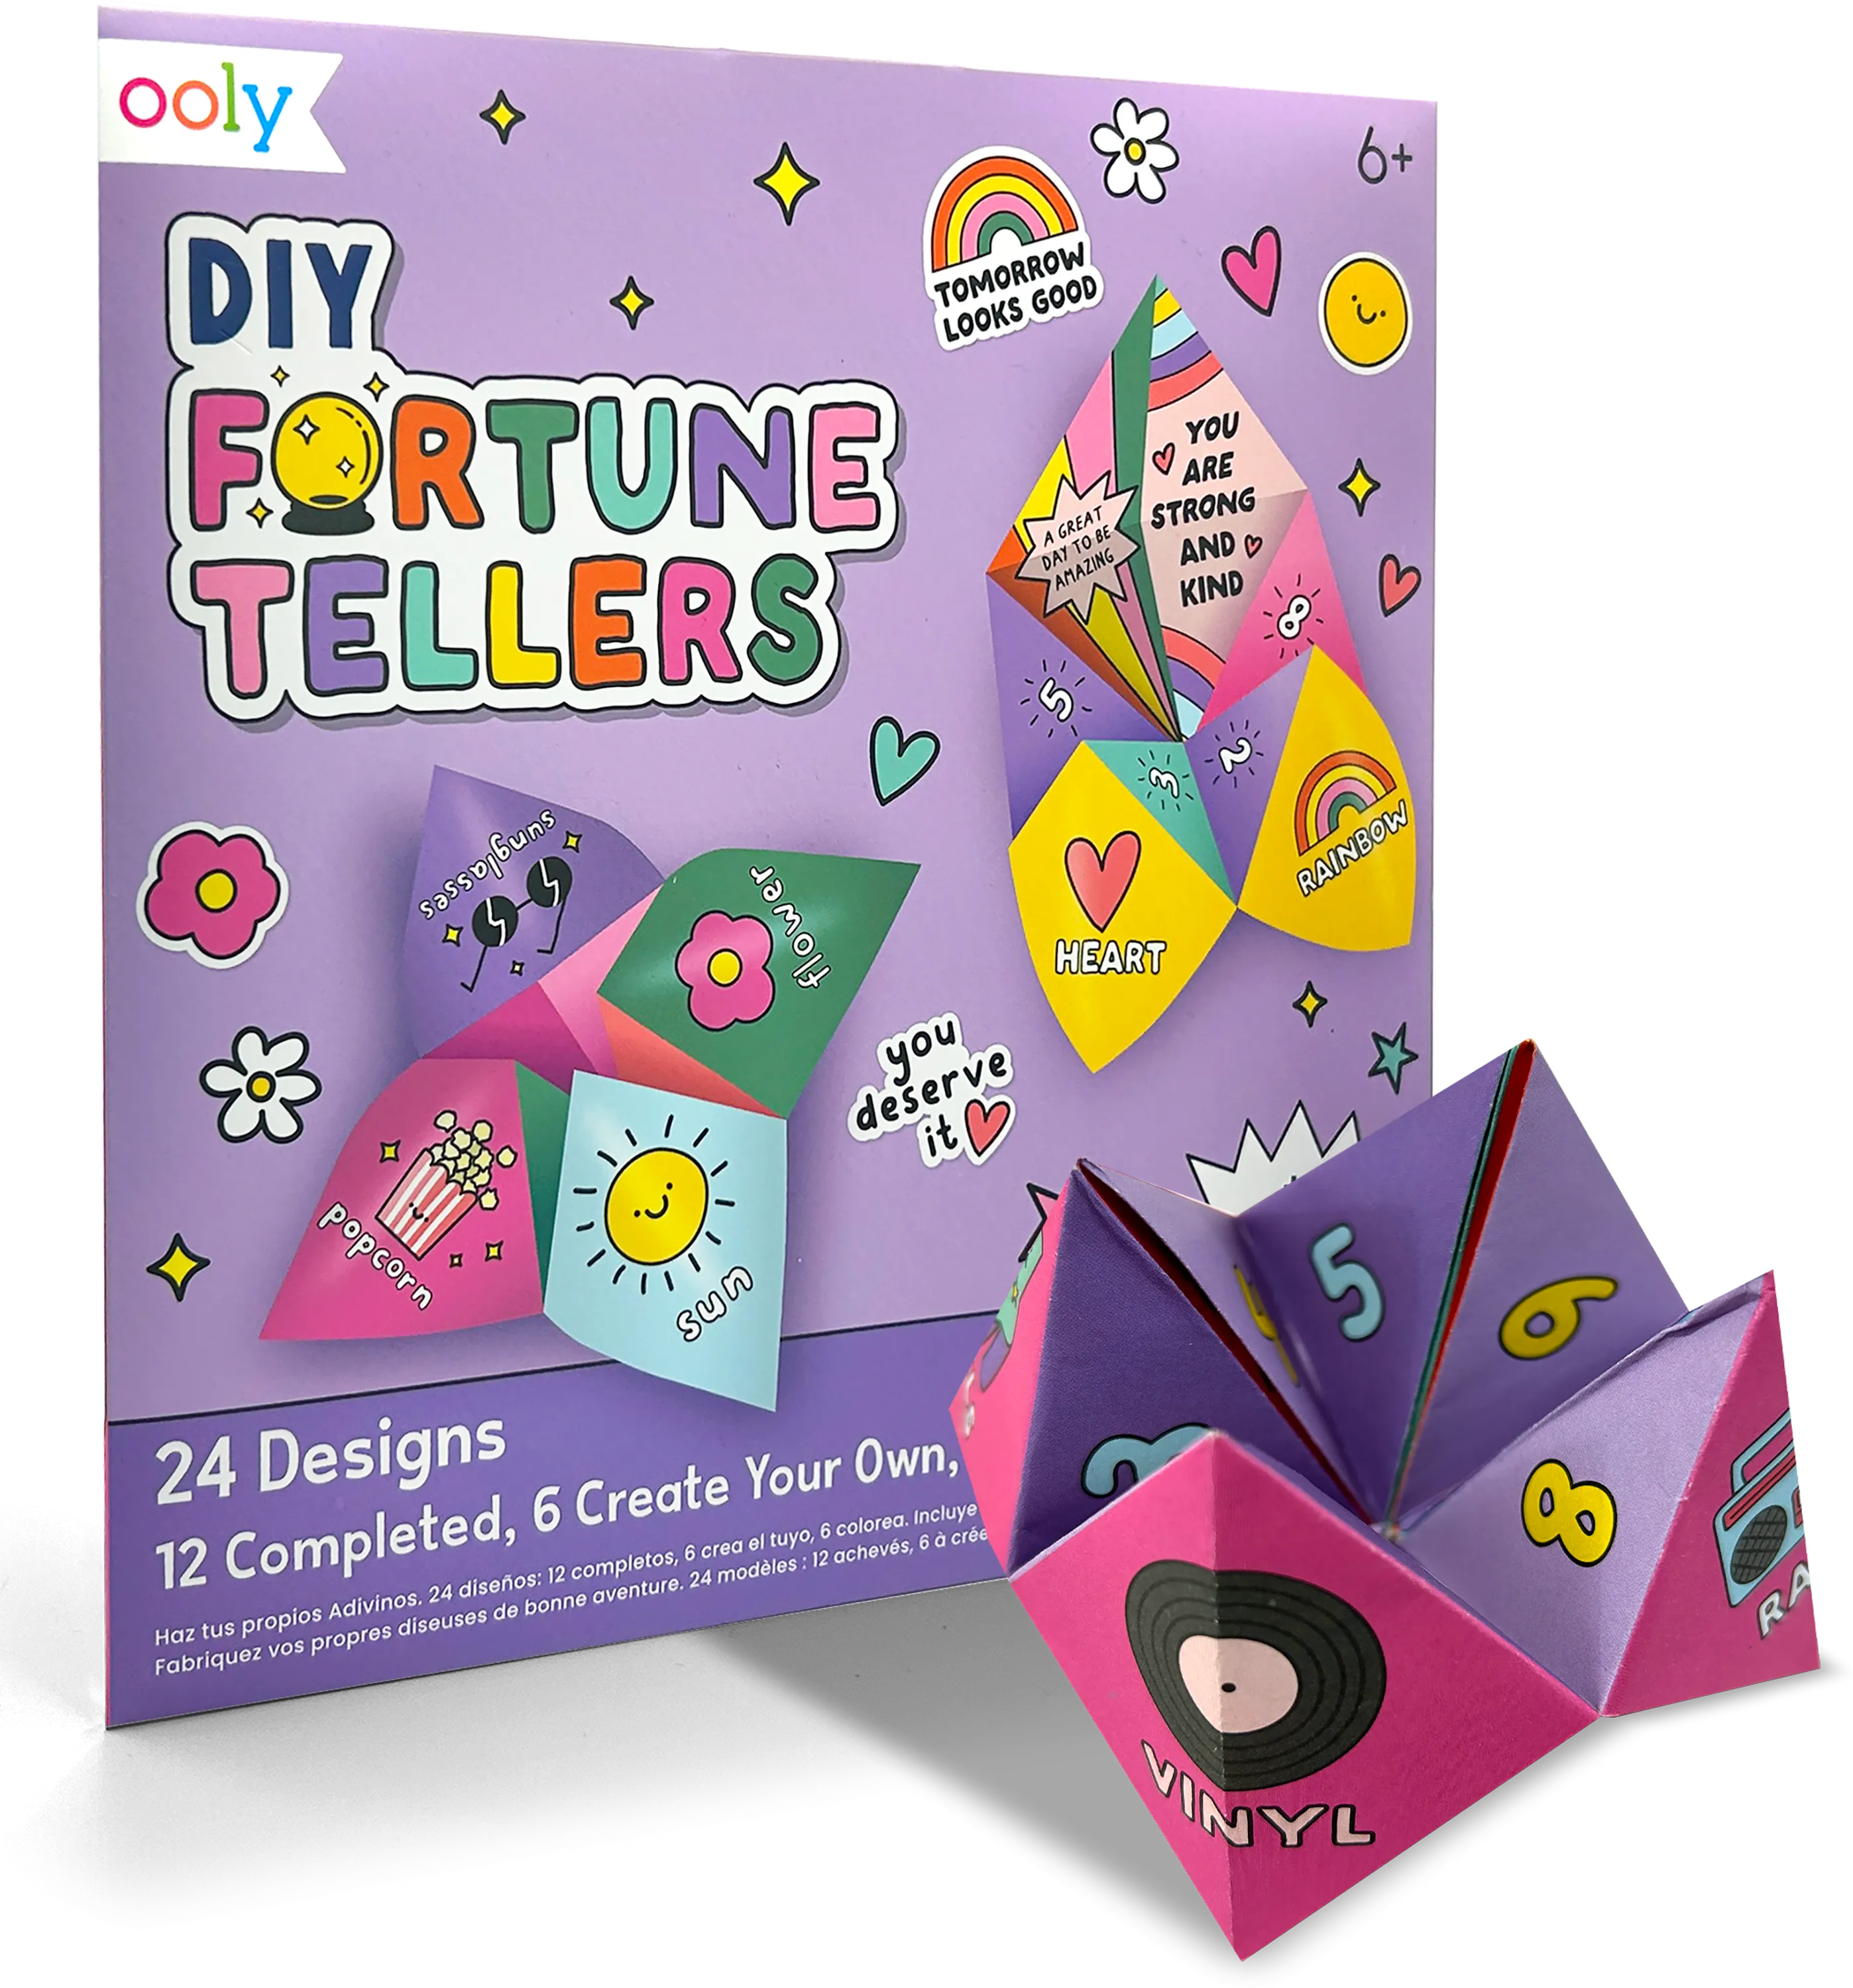 Quarter angle of OOLY DIY Fortune Tellers Activity Kit packaging